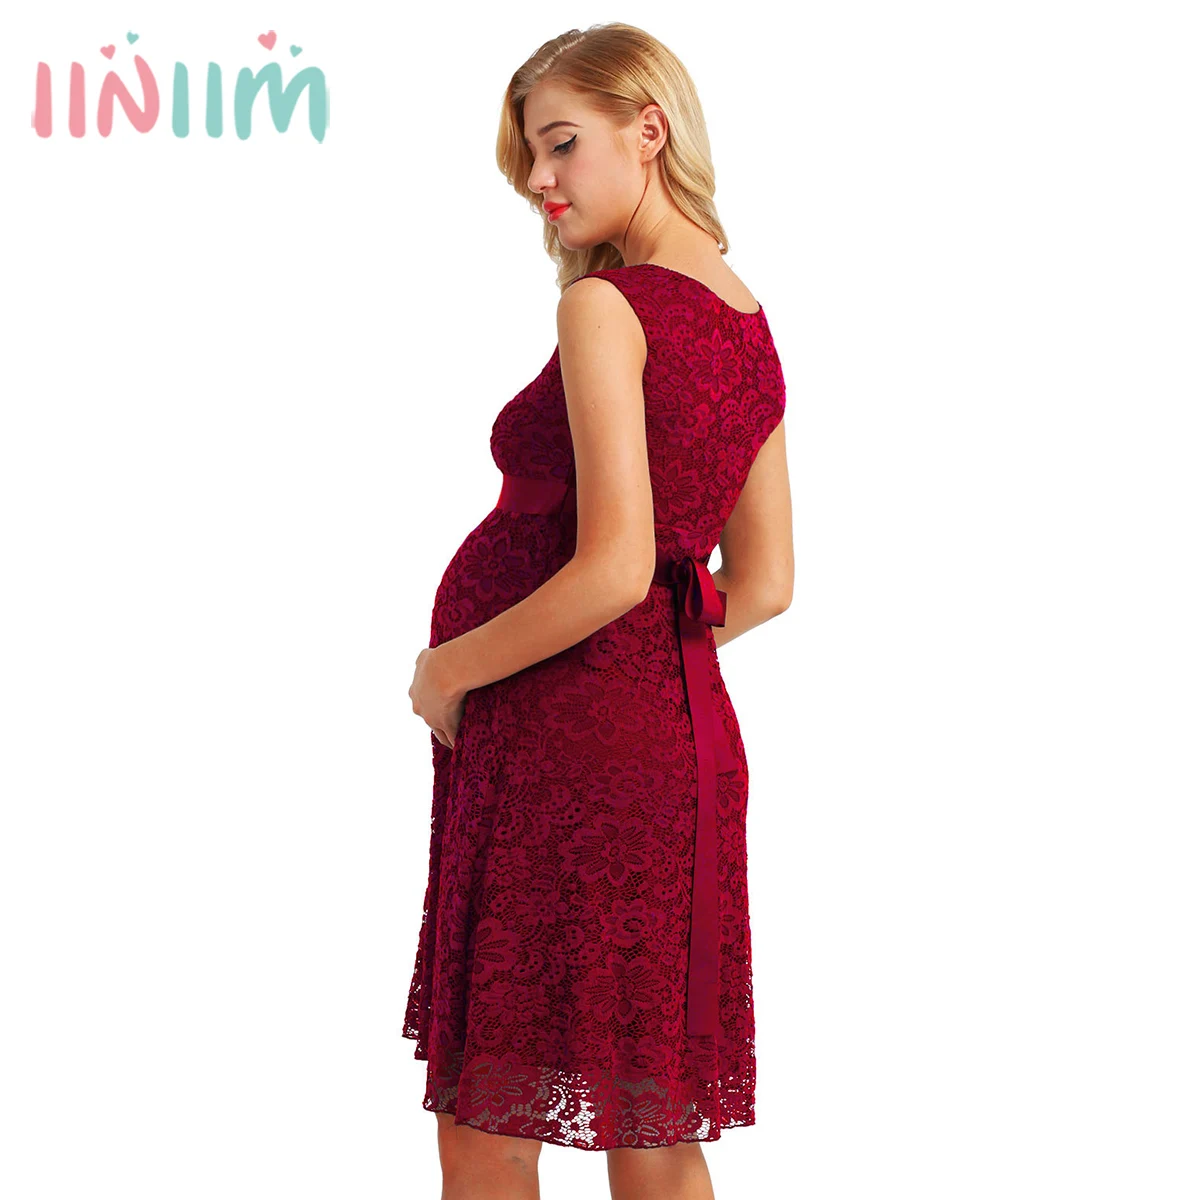 

Women Maternity Elegant Floral Lace Overlay Sleeveless Baby Shower Party Cocktail Dress with Ribbon Belt for Maternity Clothing